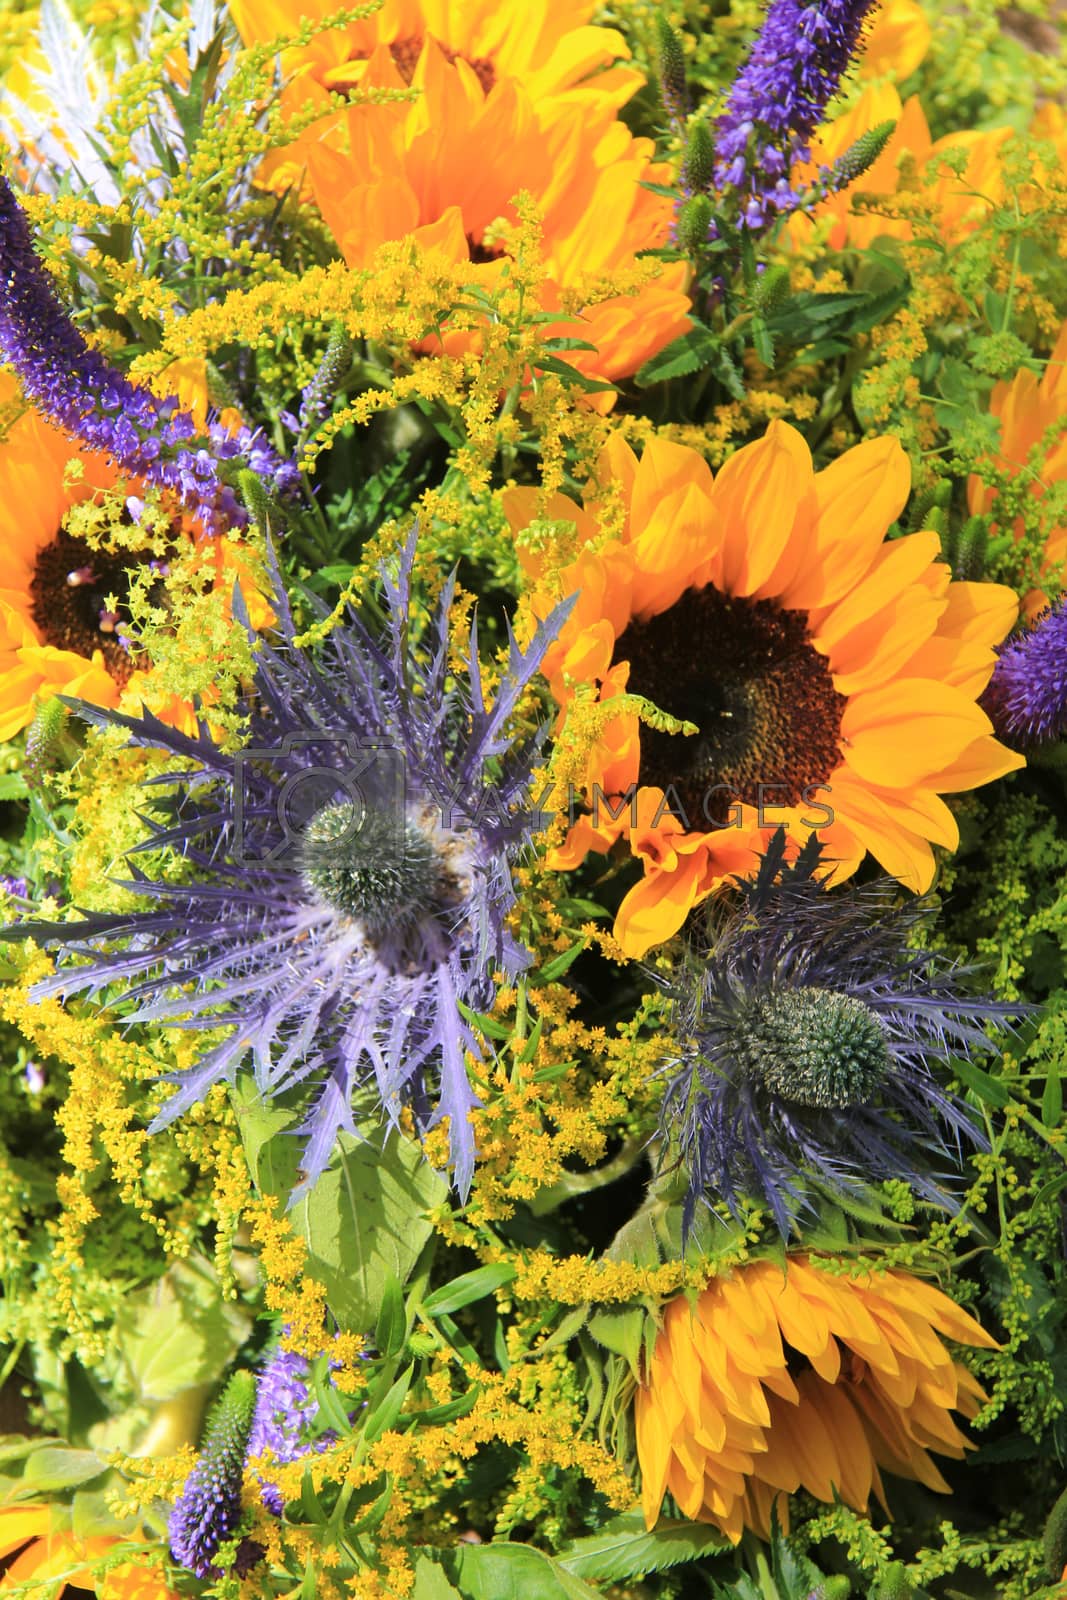 Royalty free image of Blue and yellow Sunflower arrangement, Wedding decorations by studioportosabbia